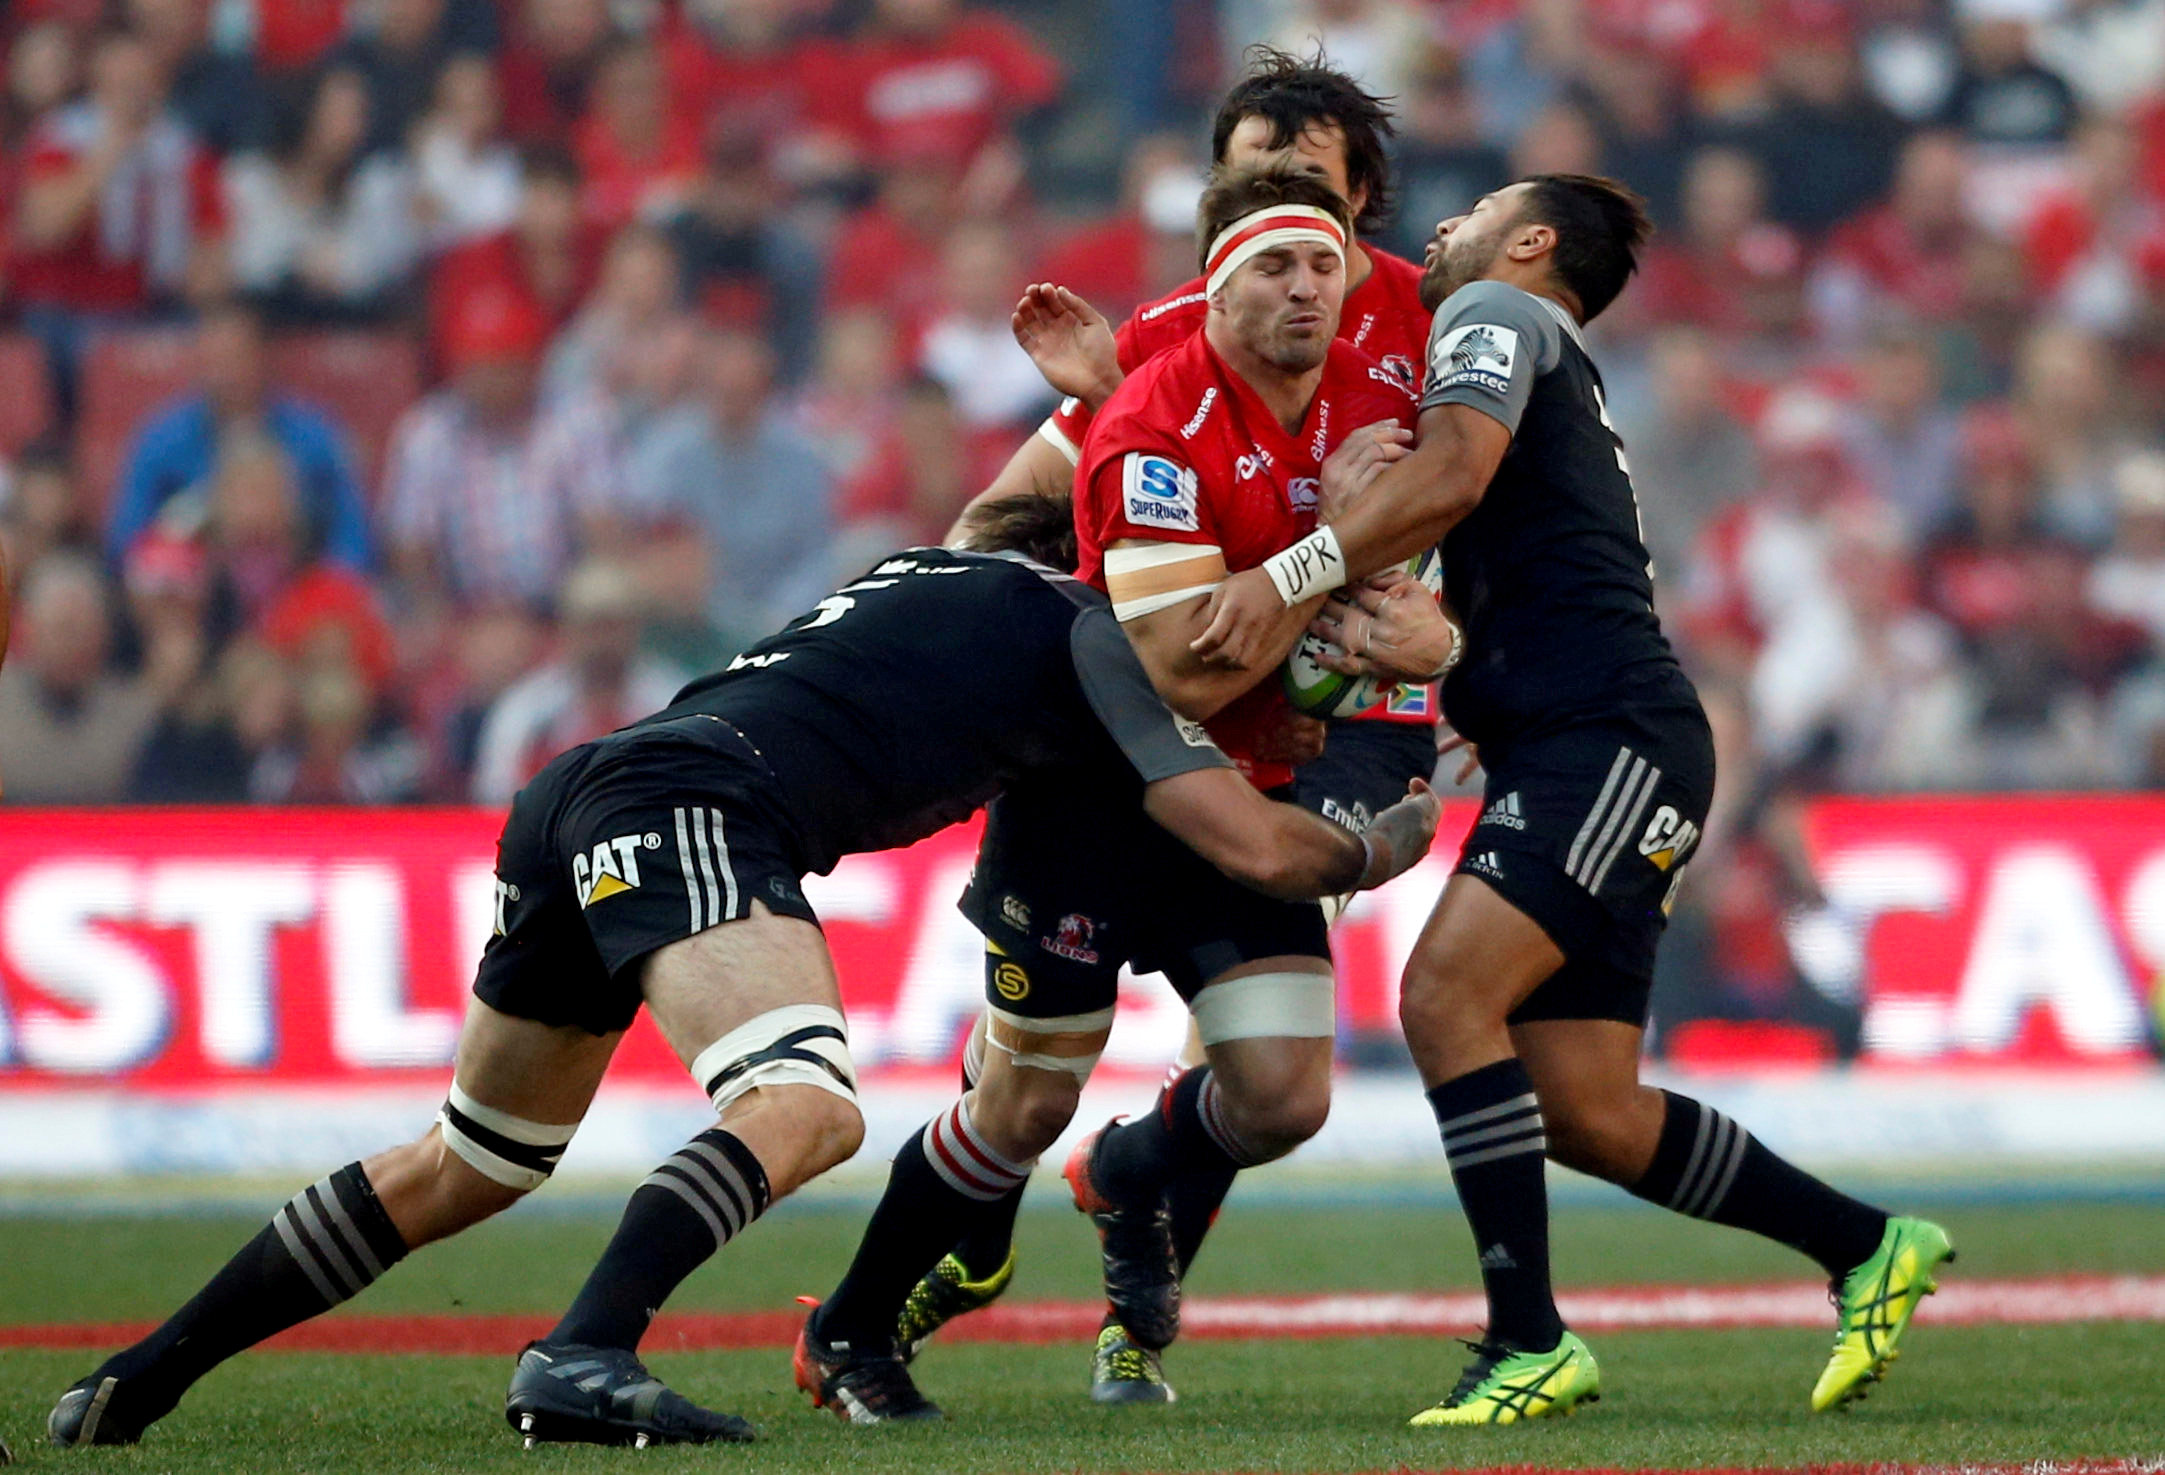 Rugby: Lions coach backs enigmatic Jantjies head of final